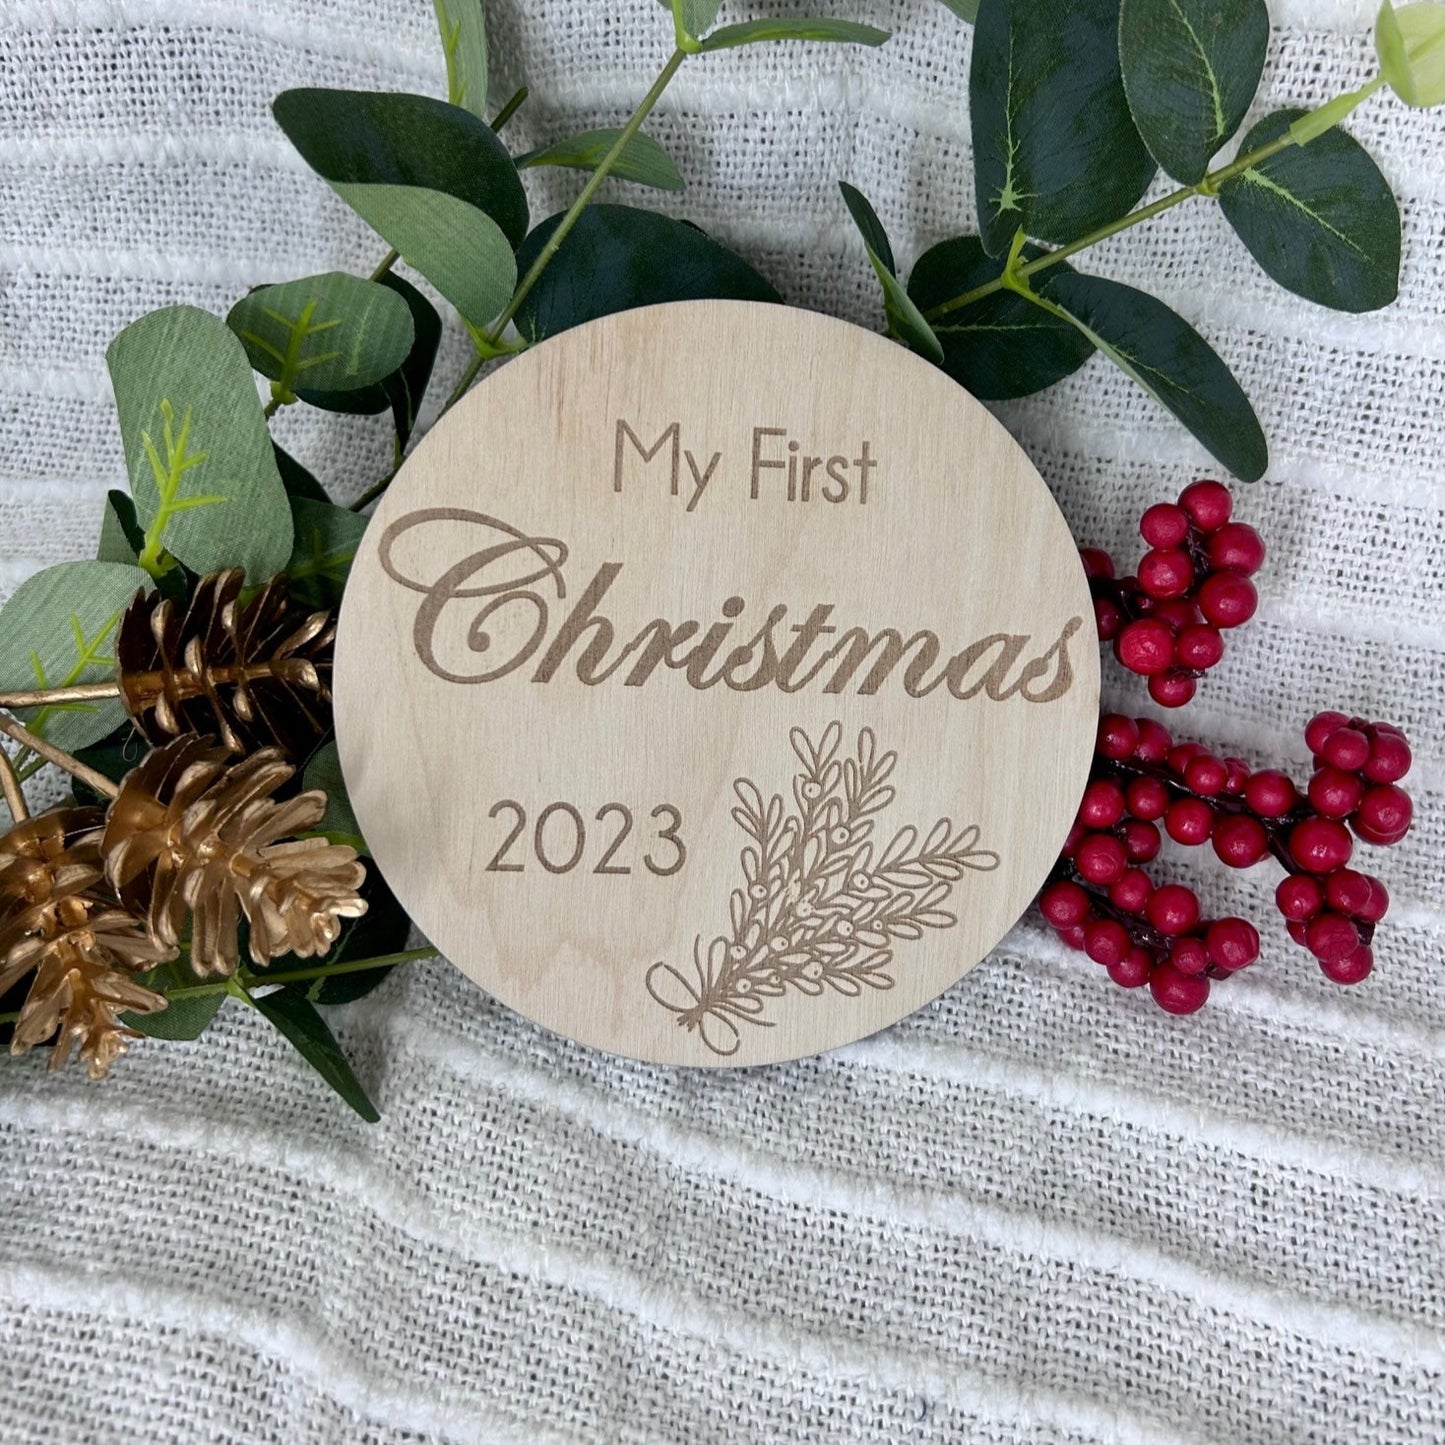 My First Christmas Milestone Disc | Baby's First Christmas